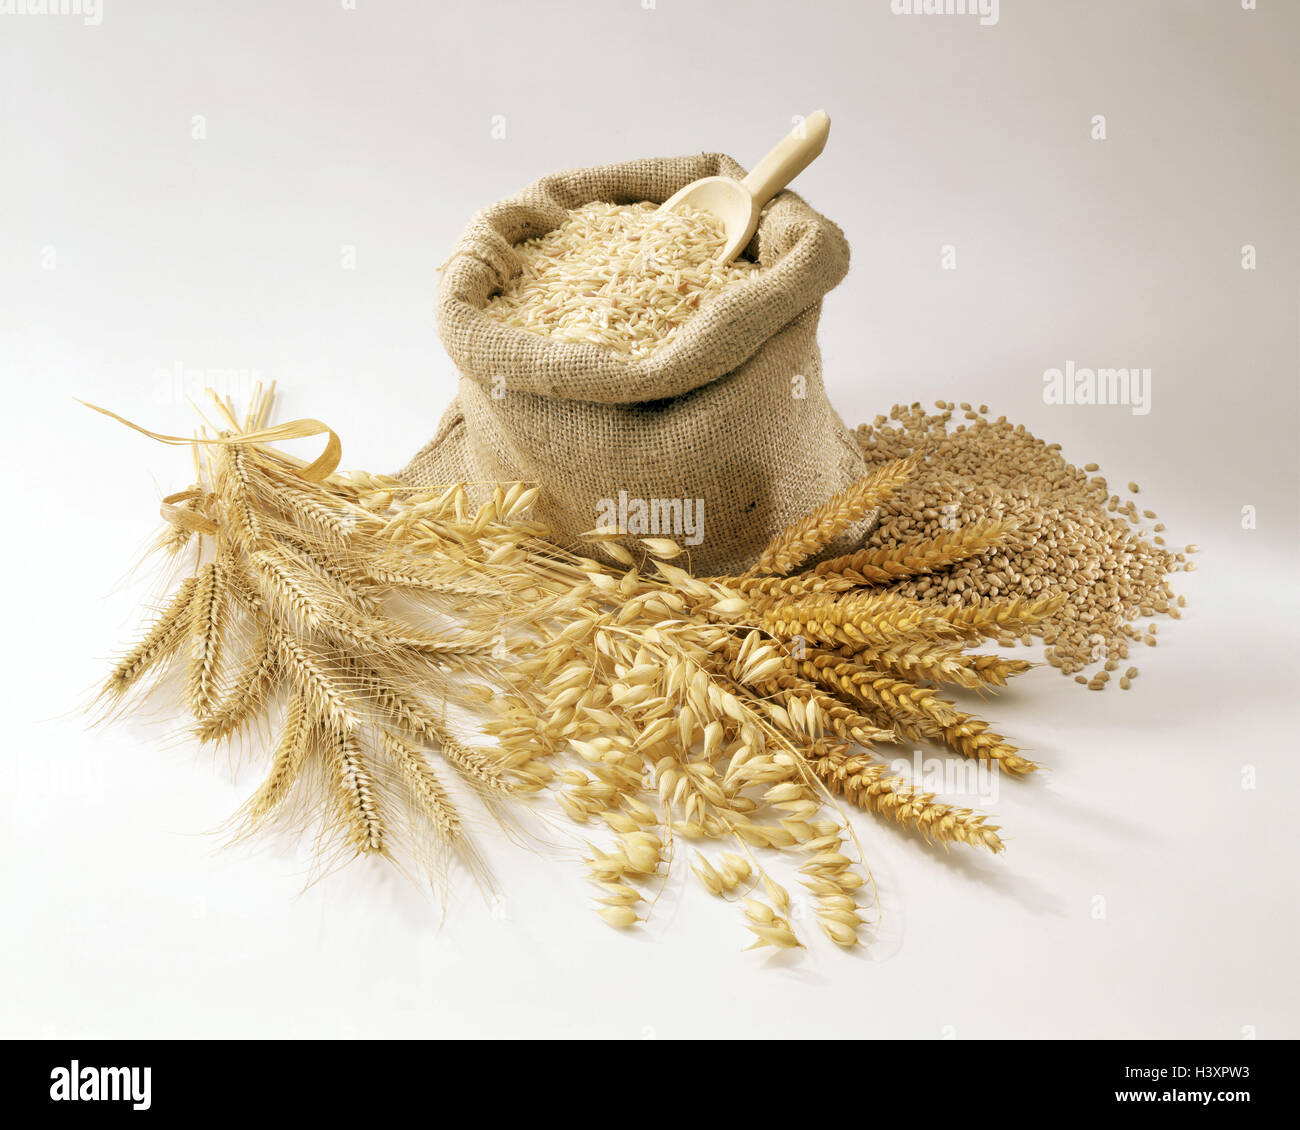 Grain, sorts, passed away, ears, jute pouch, travel, copy space cereals, grain sorts, grain ears, grain centre punches, rye ear, roughage, cultivated plants, food, Still life, product photography, cut out, studio Stock Photo